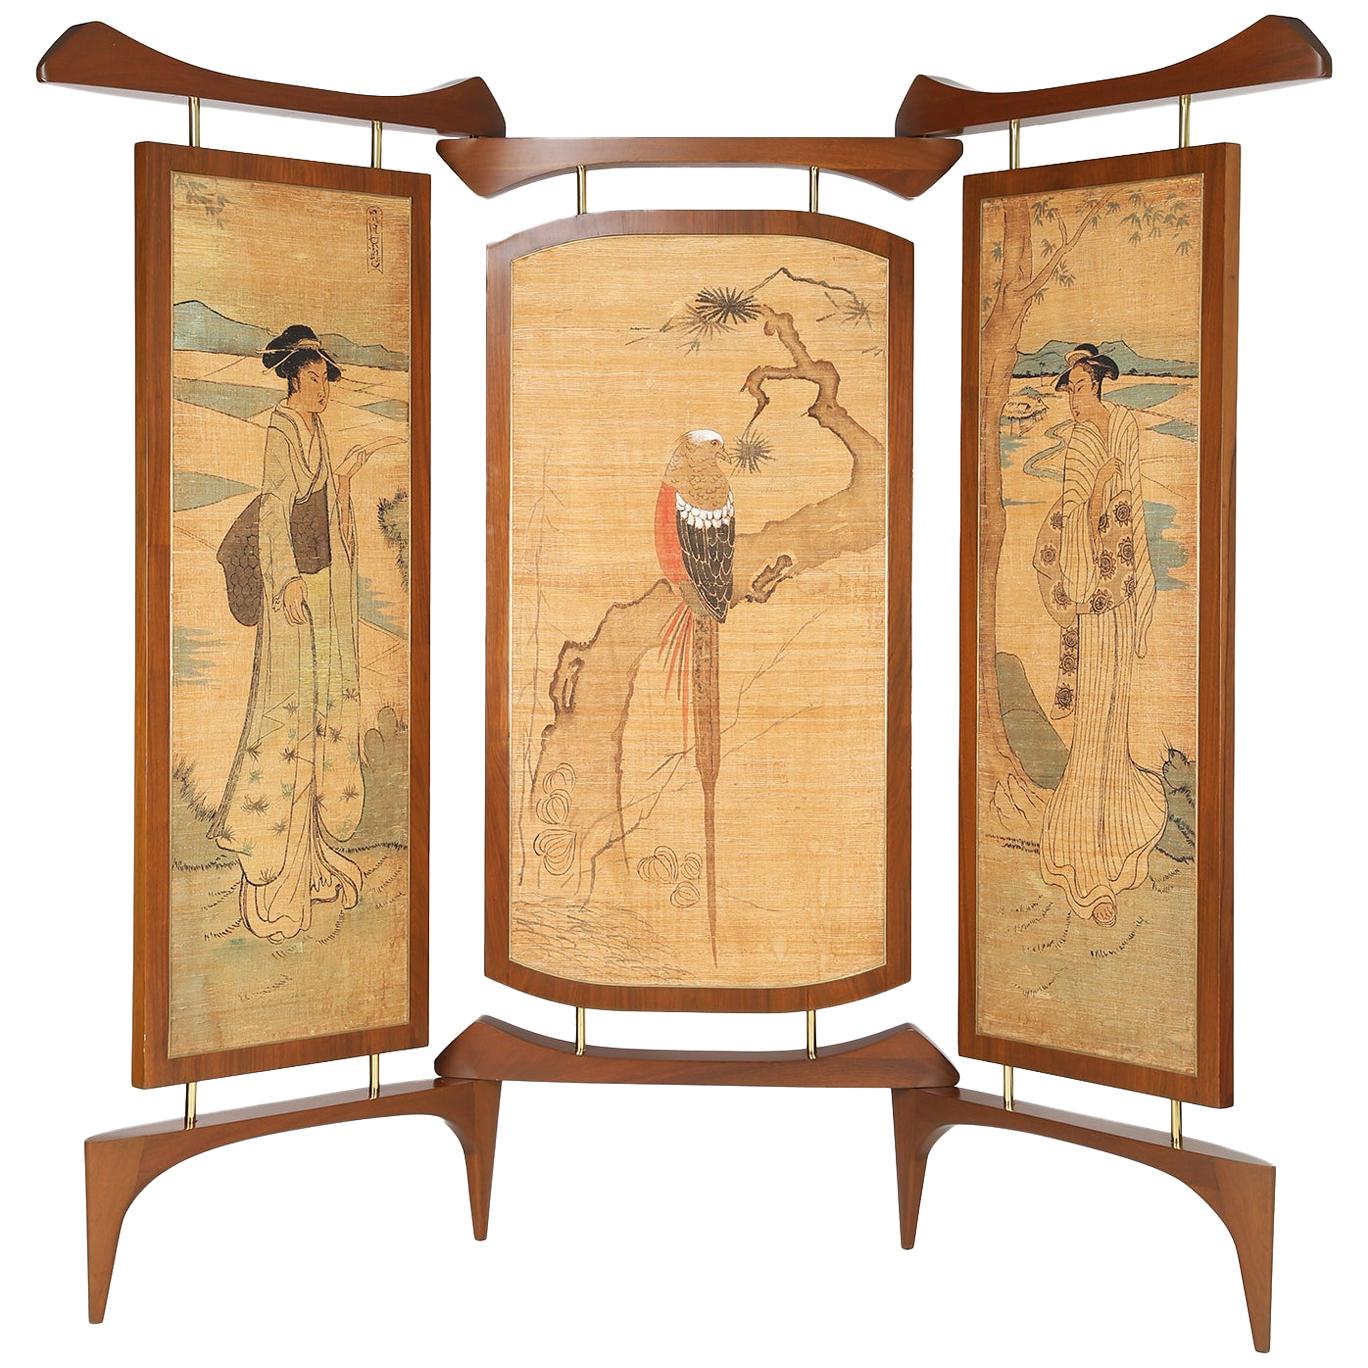 Frank Kyle Extraordinary 3-Panel Screen with Japanese Motif, 1950s